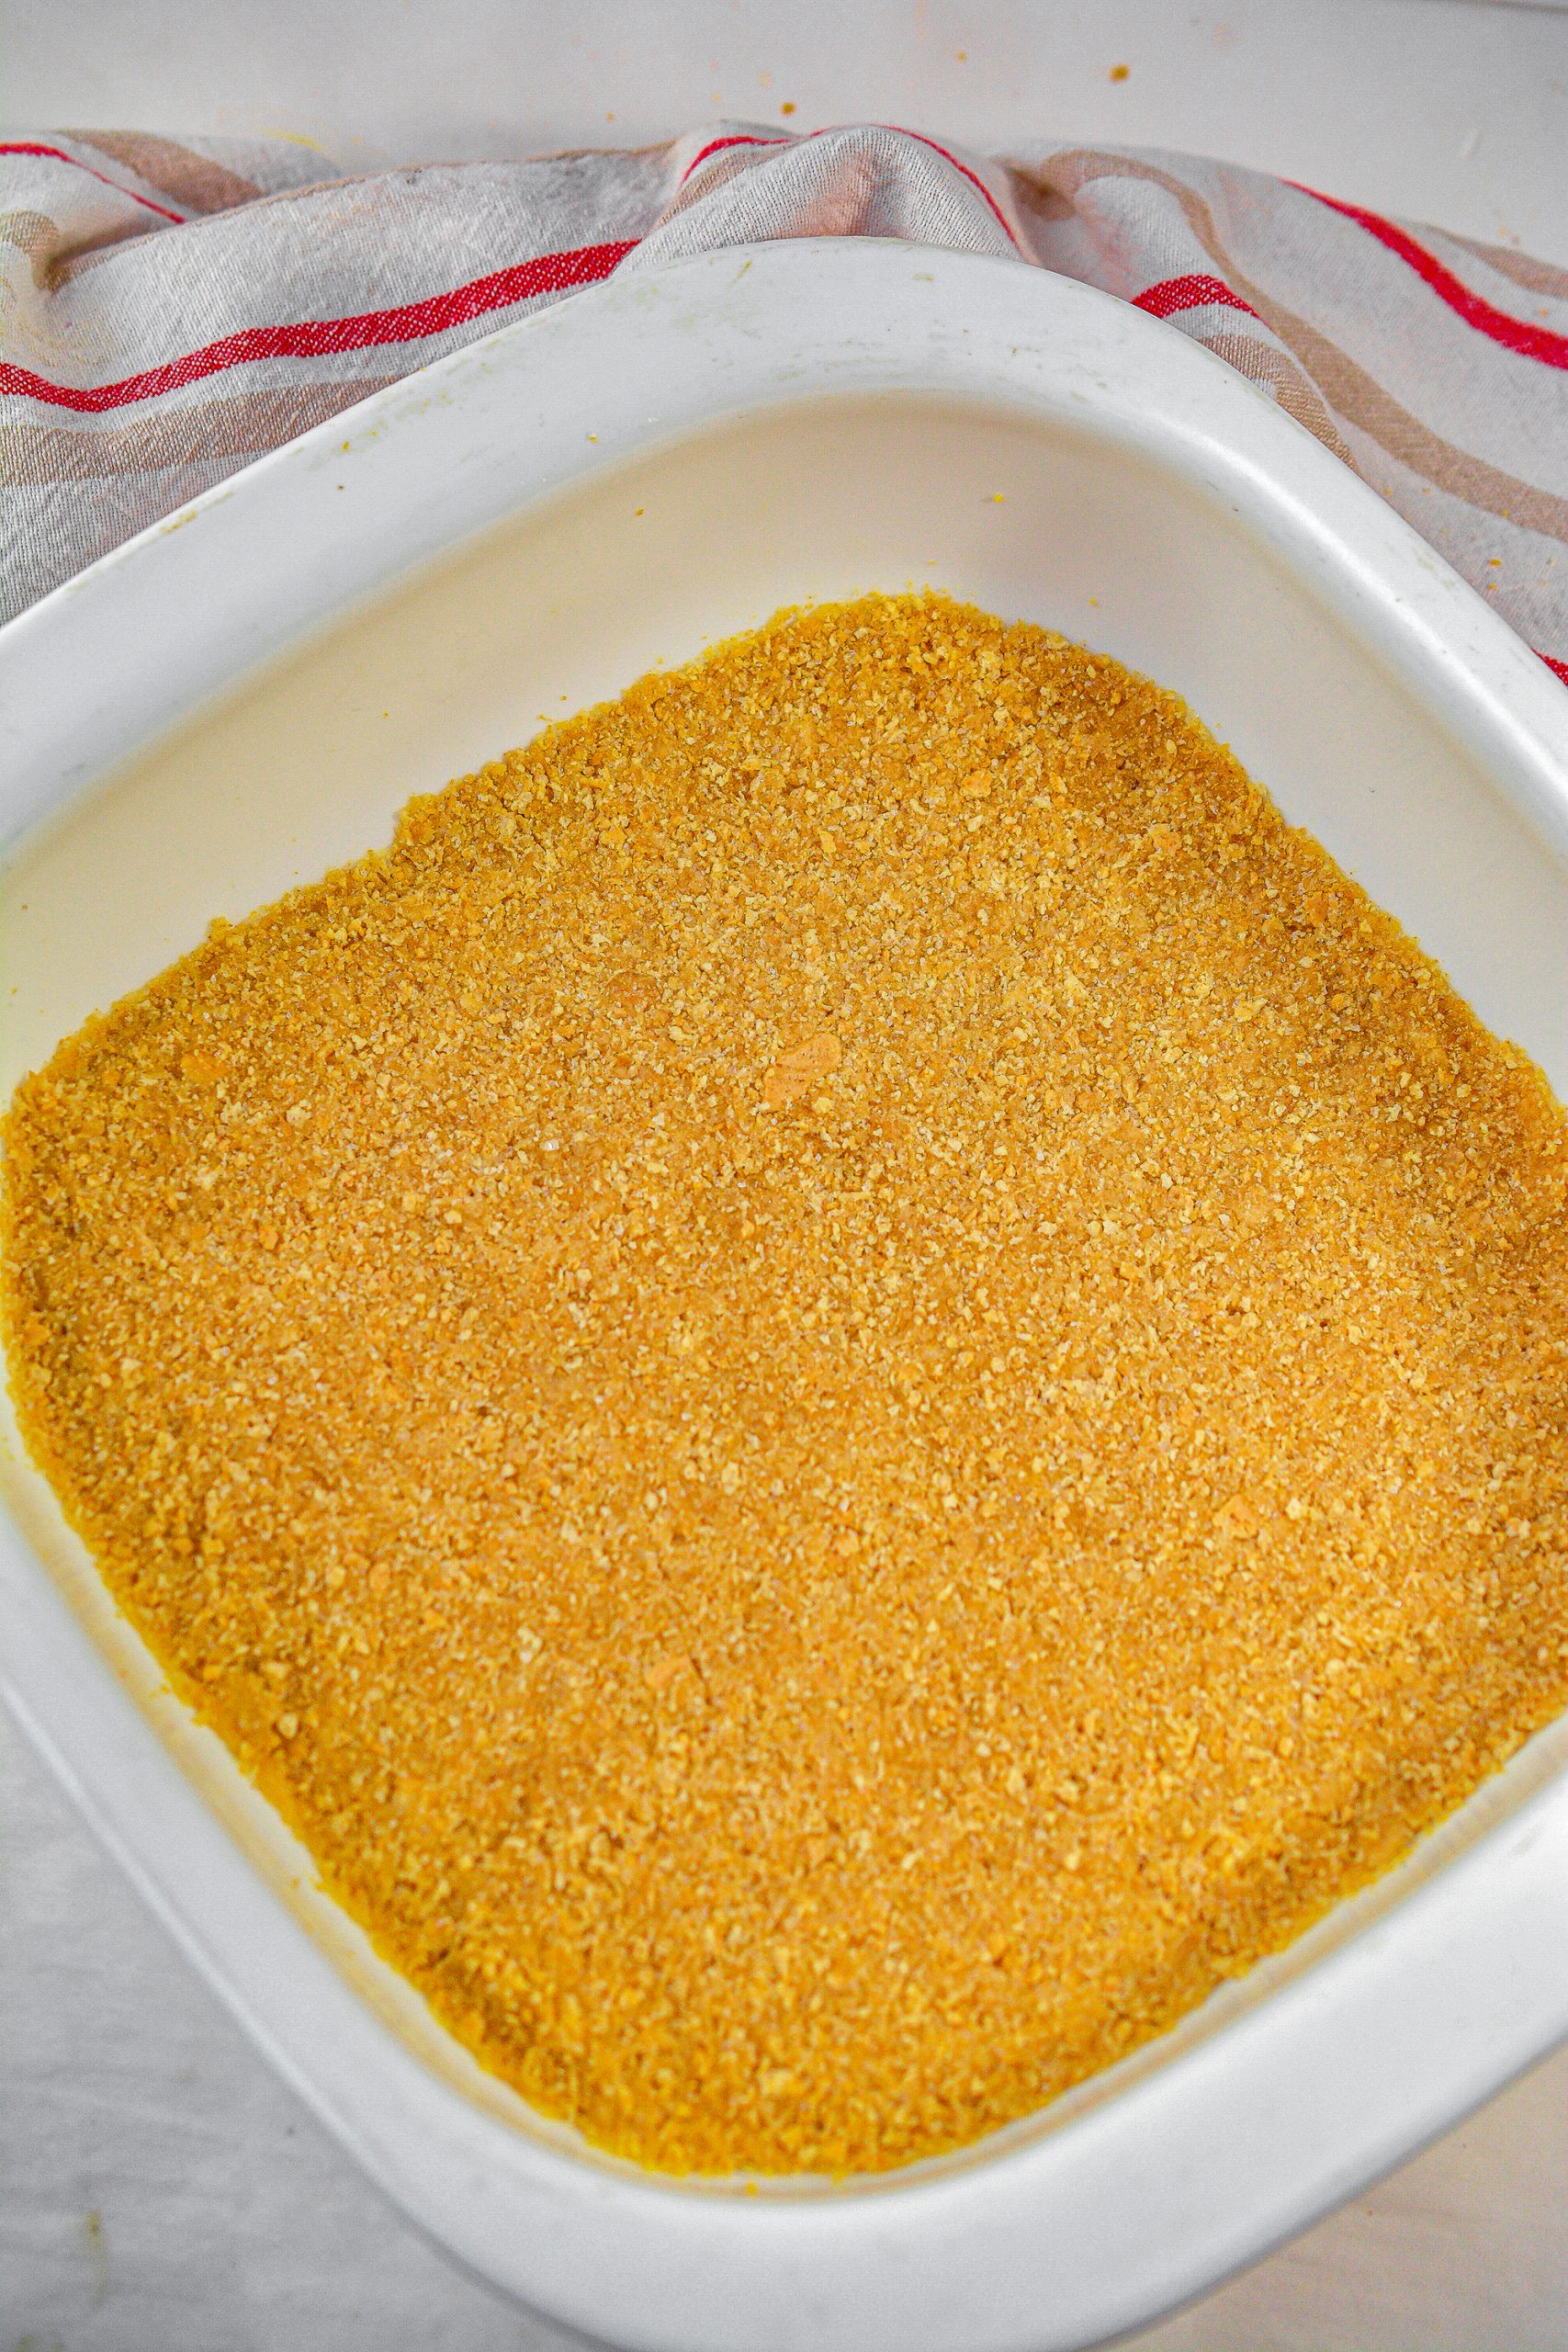 Press the crust mixture into the bottom of the greased baking dish, and bake for 15 minutes.